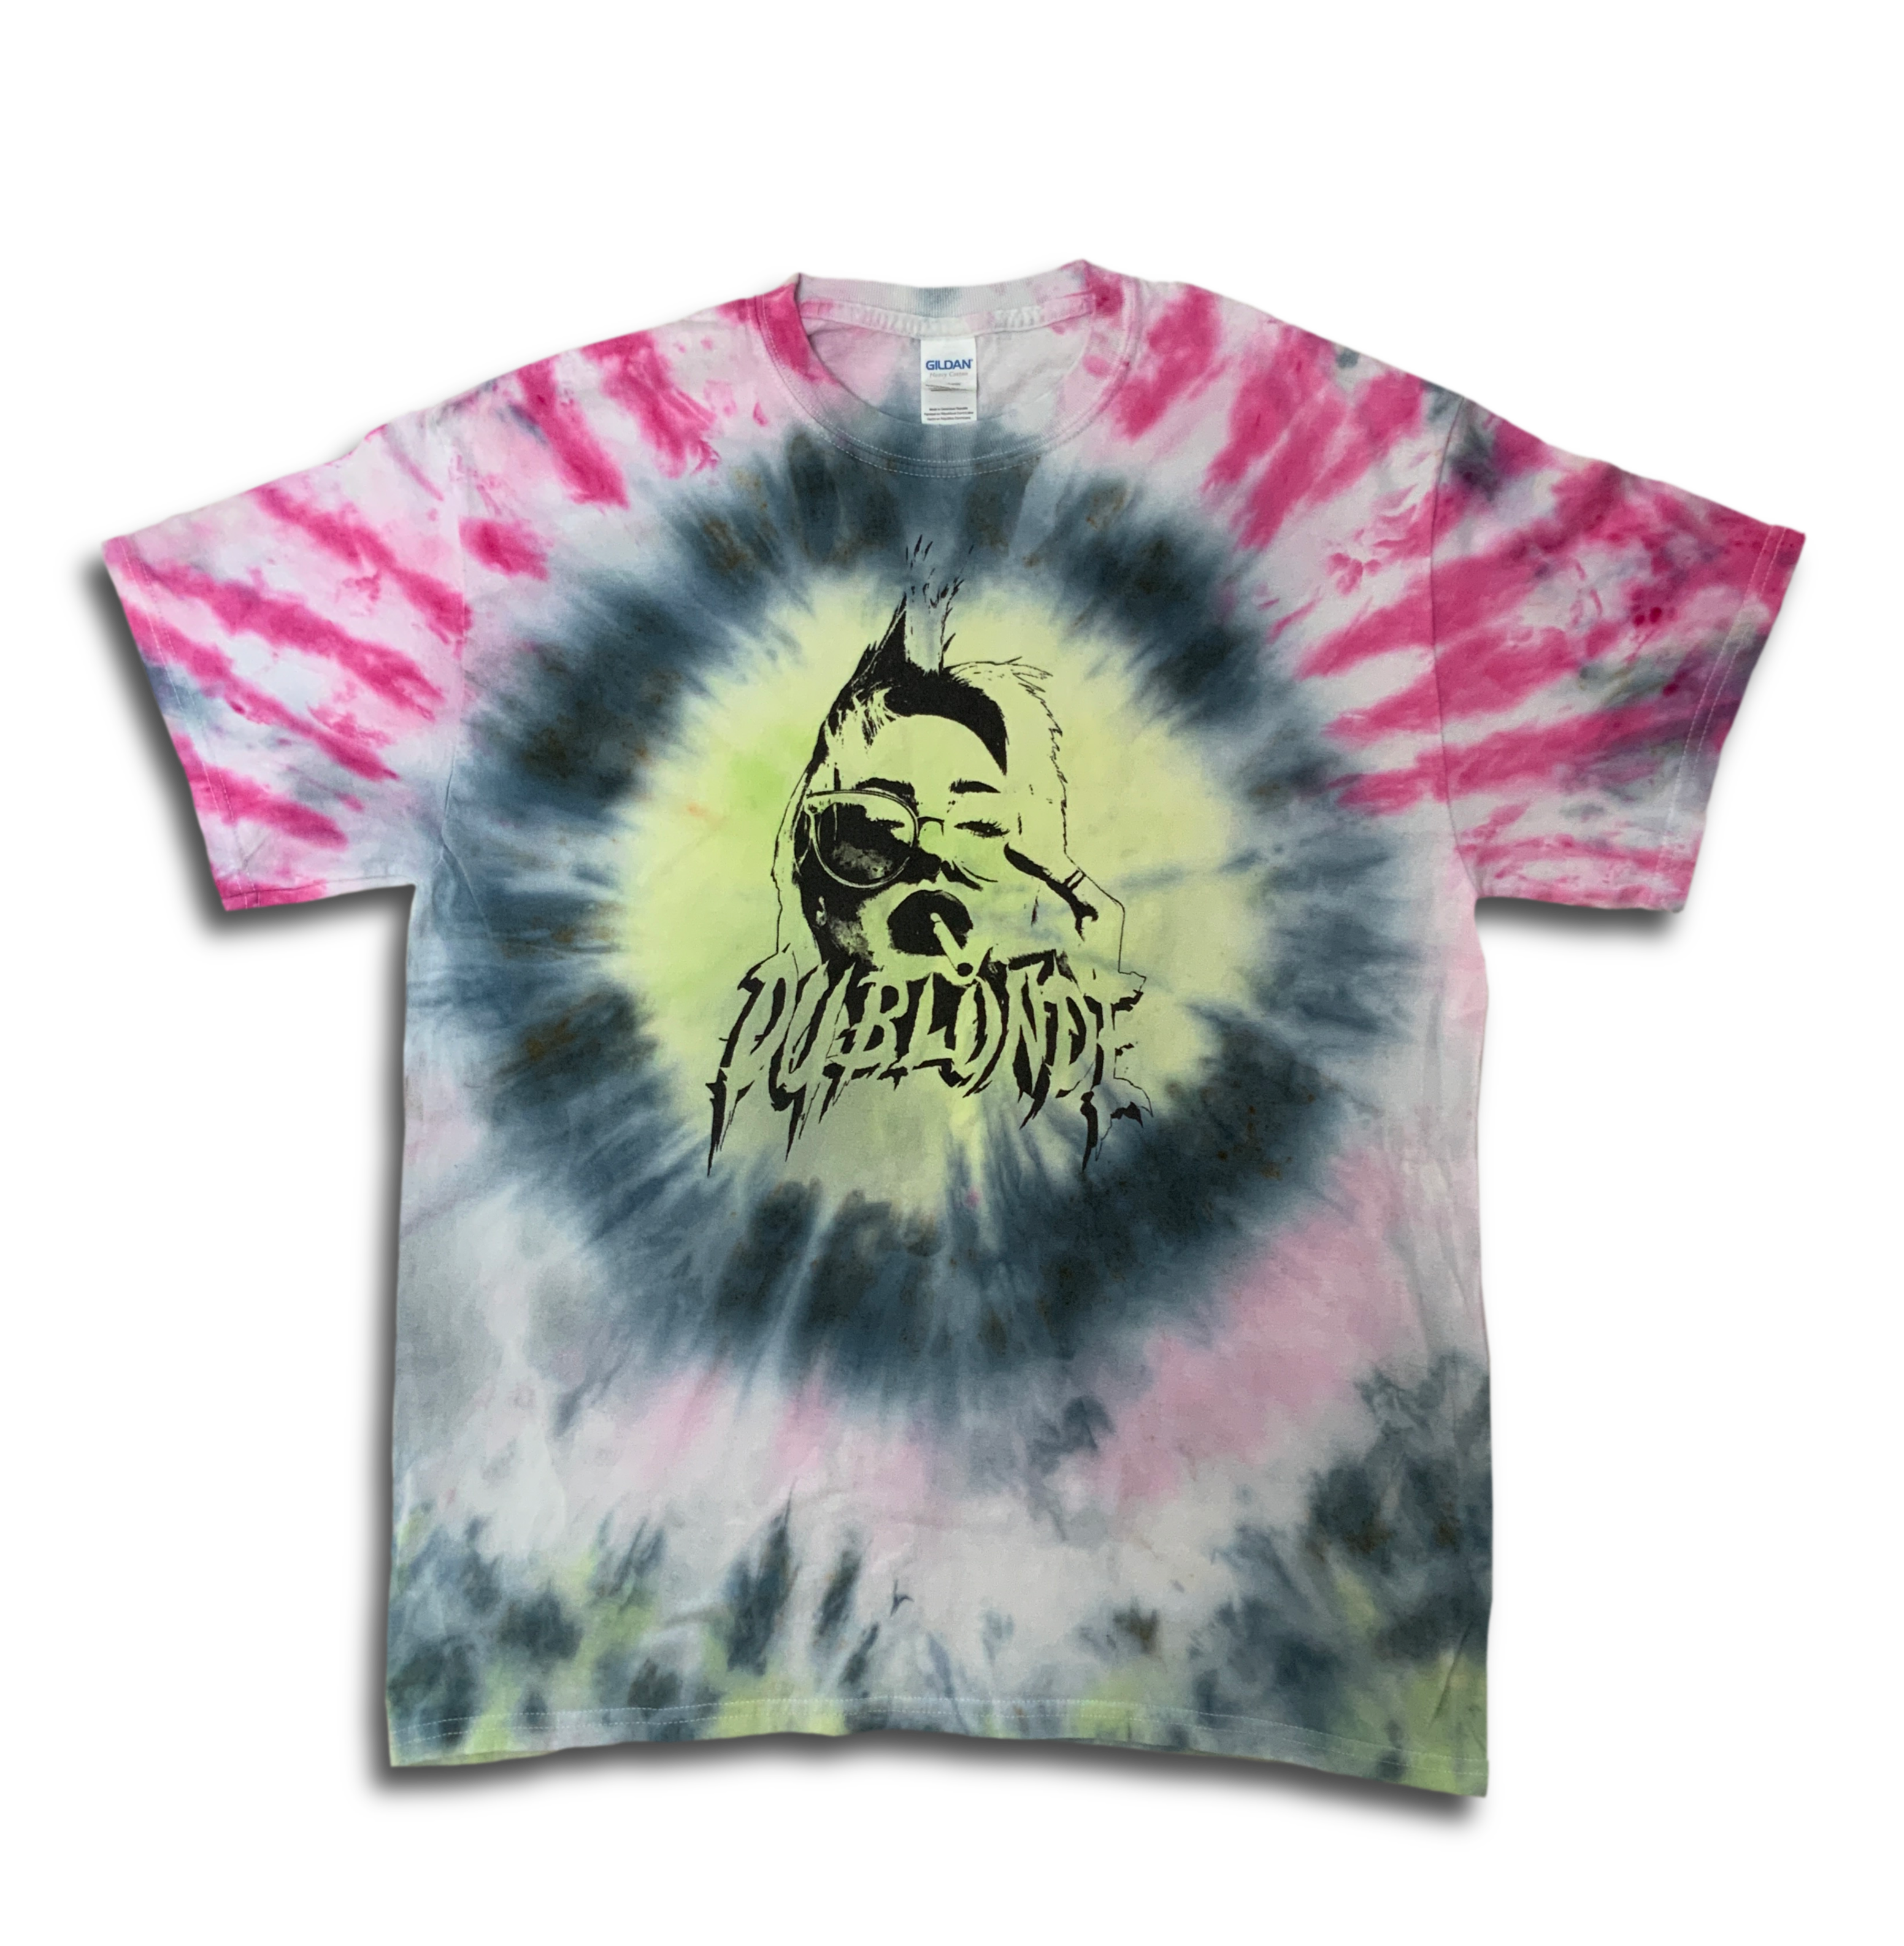 'HOMECOMING' Wounded Acid Tee - L